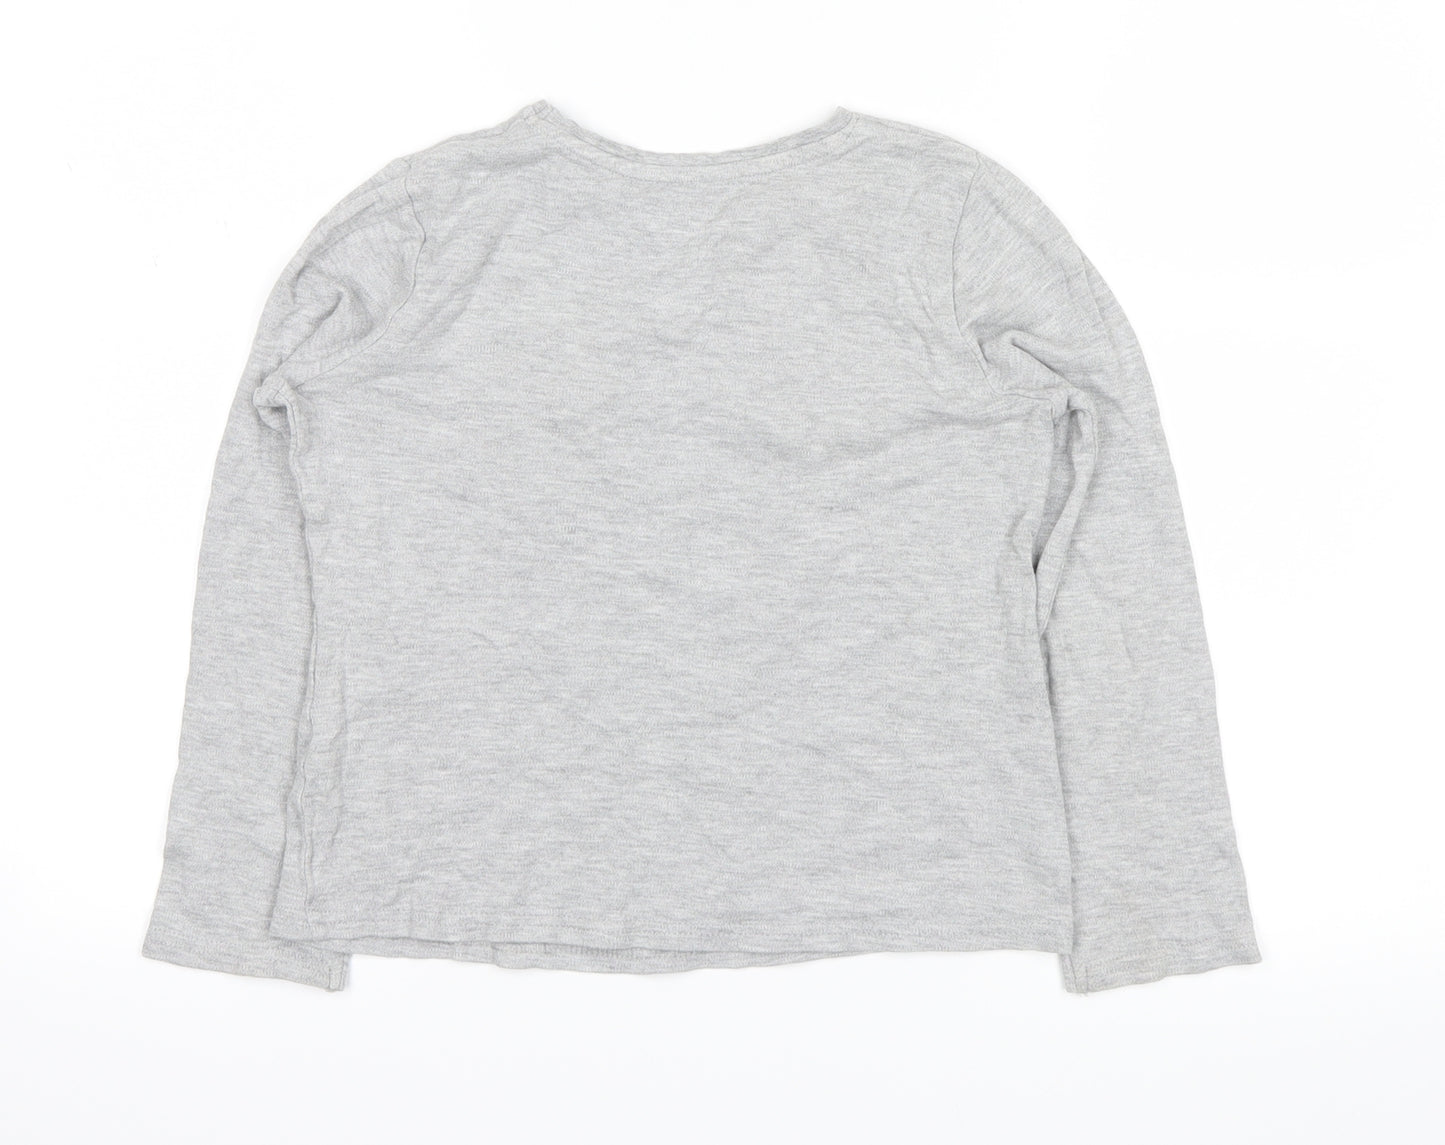 George Girls Grey   Top Pyjama Top Size 7-8 Years  - monster in the making